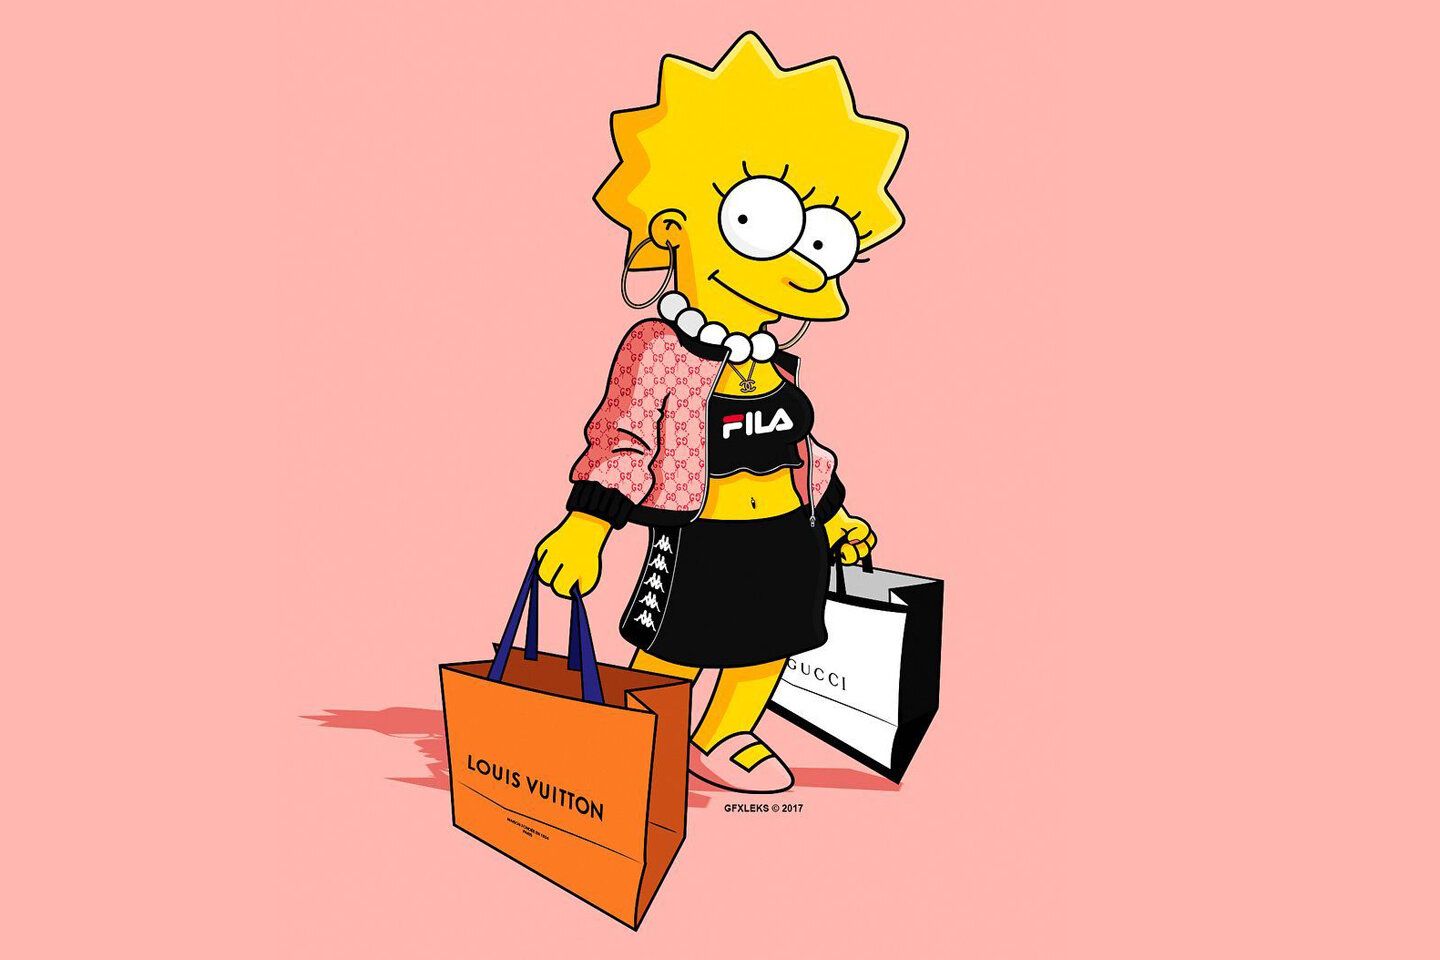 A cartoon of the simpsons character holding shopping bags - Lisa Simpson